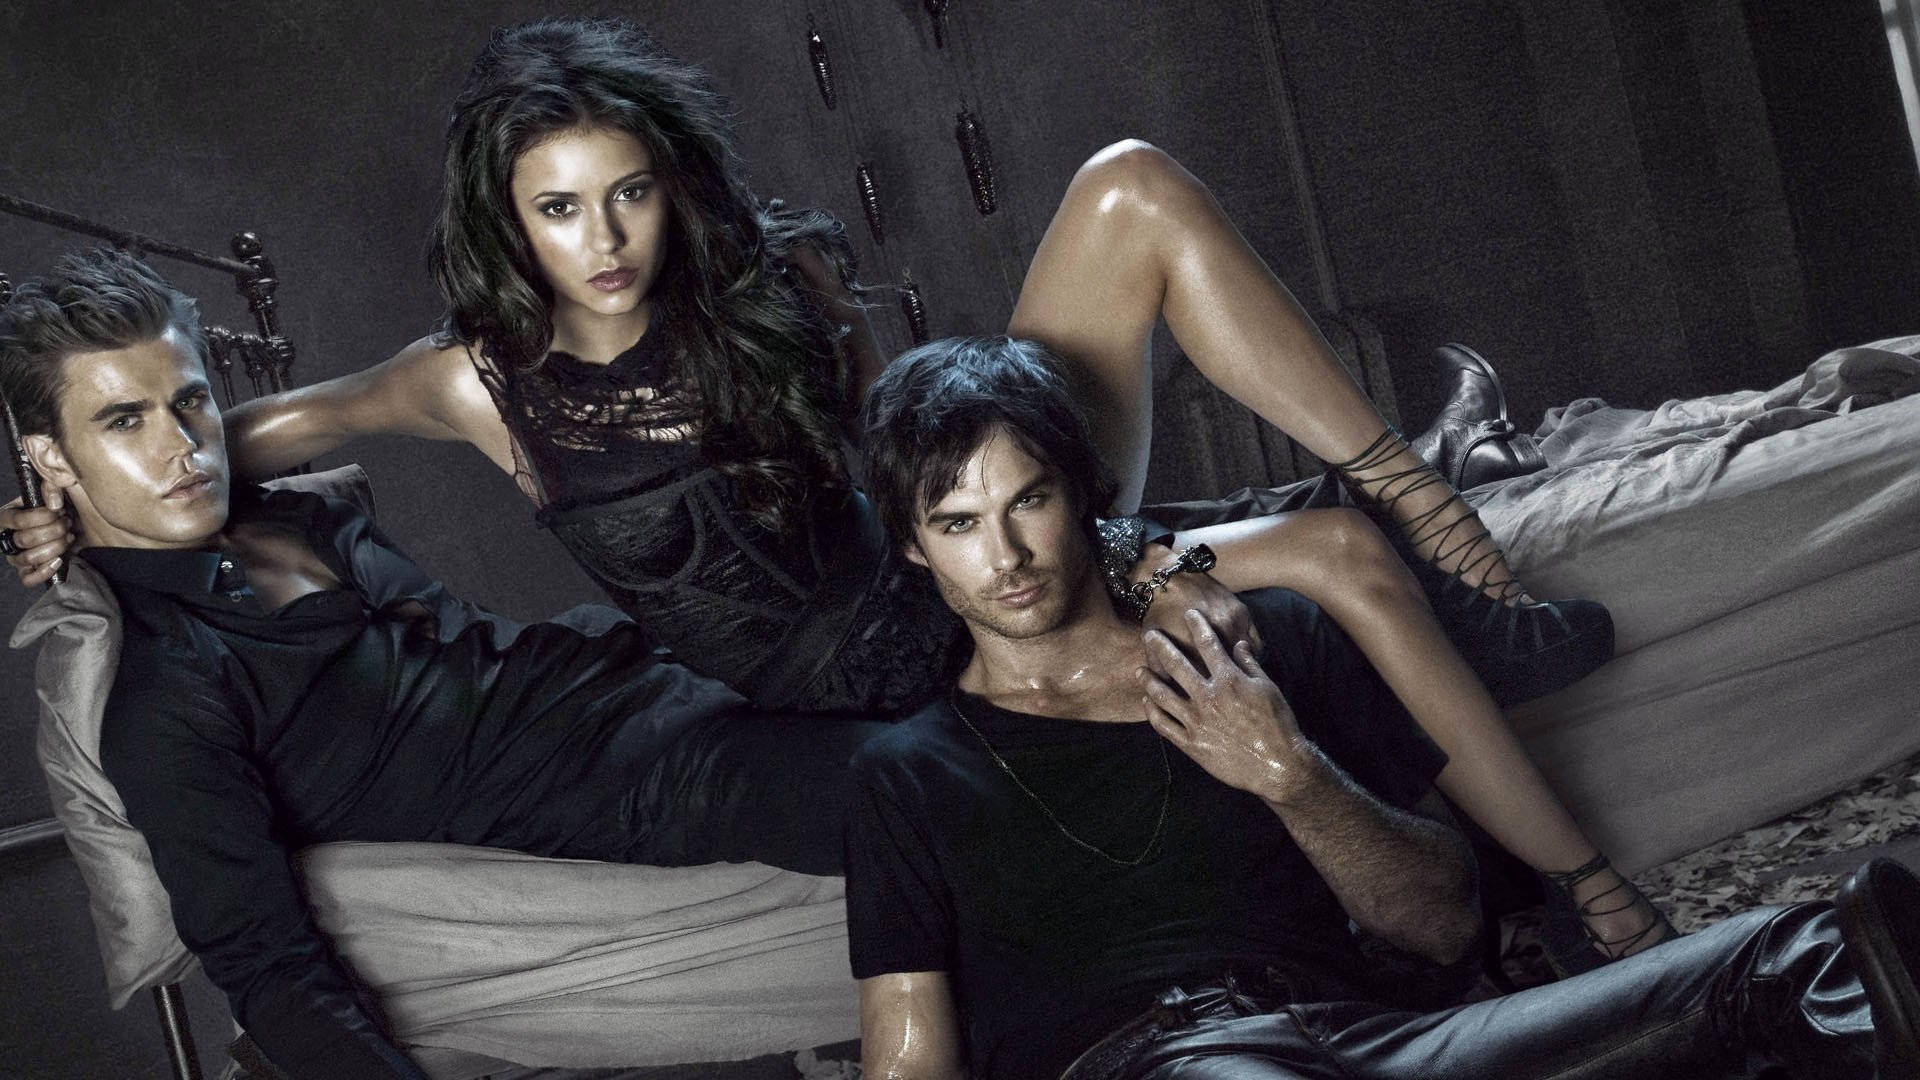 The Vampire Diaries Characters On Bed